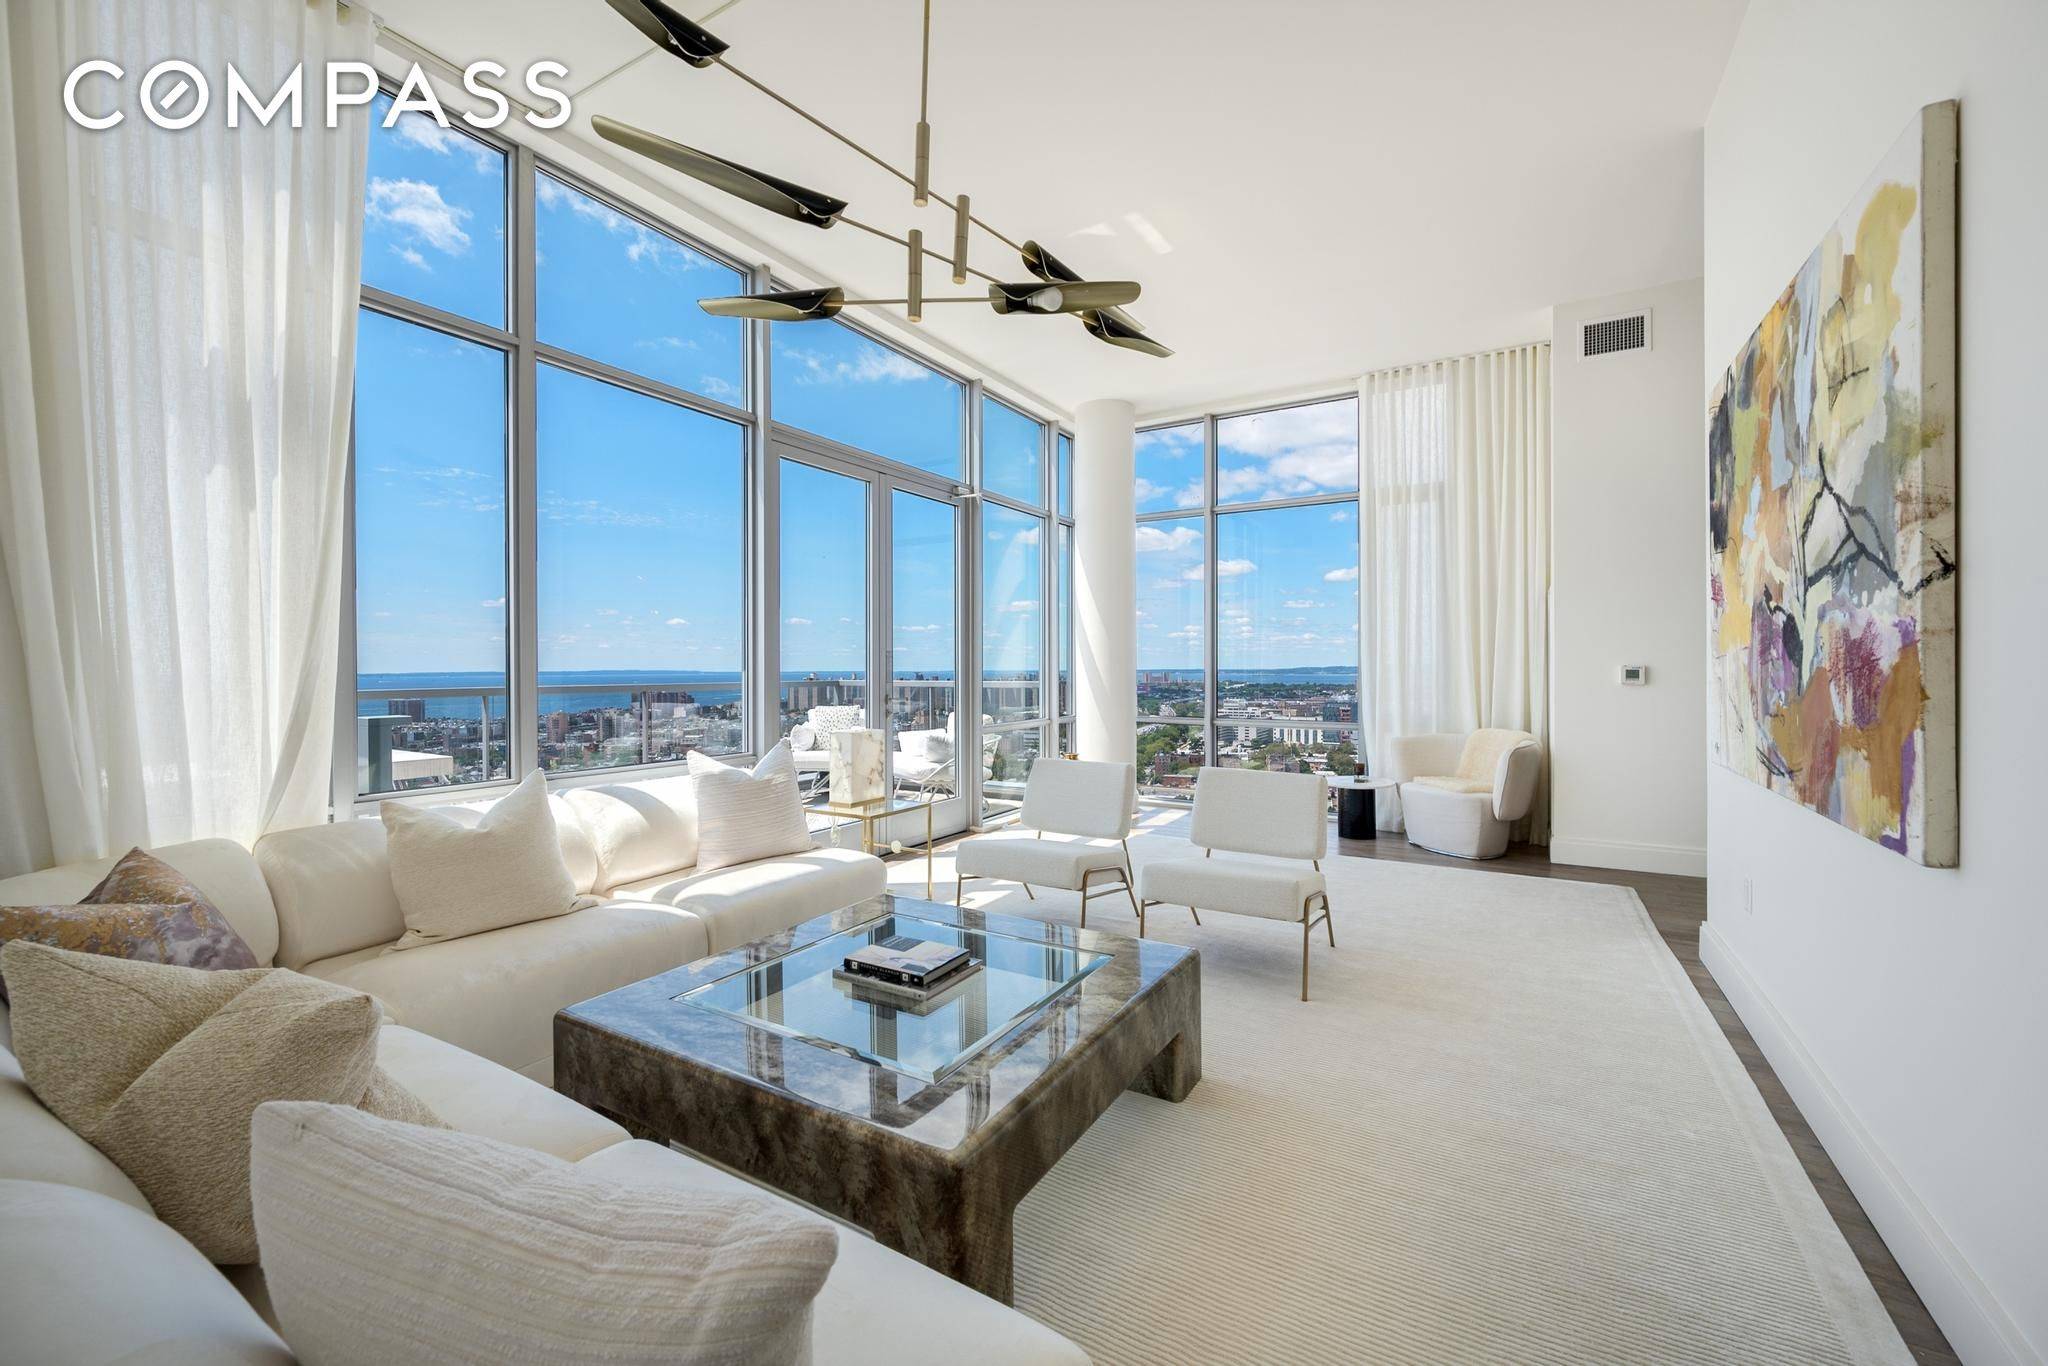 Perched on the top floor of illustrious 1 Brooklyn Bay, this sprawling four bedroom, three and a half bathroom penthouse offers unbeatable views, sun drenched designer interiors, world class amenities ...